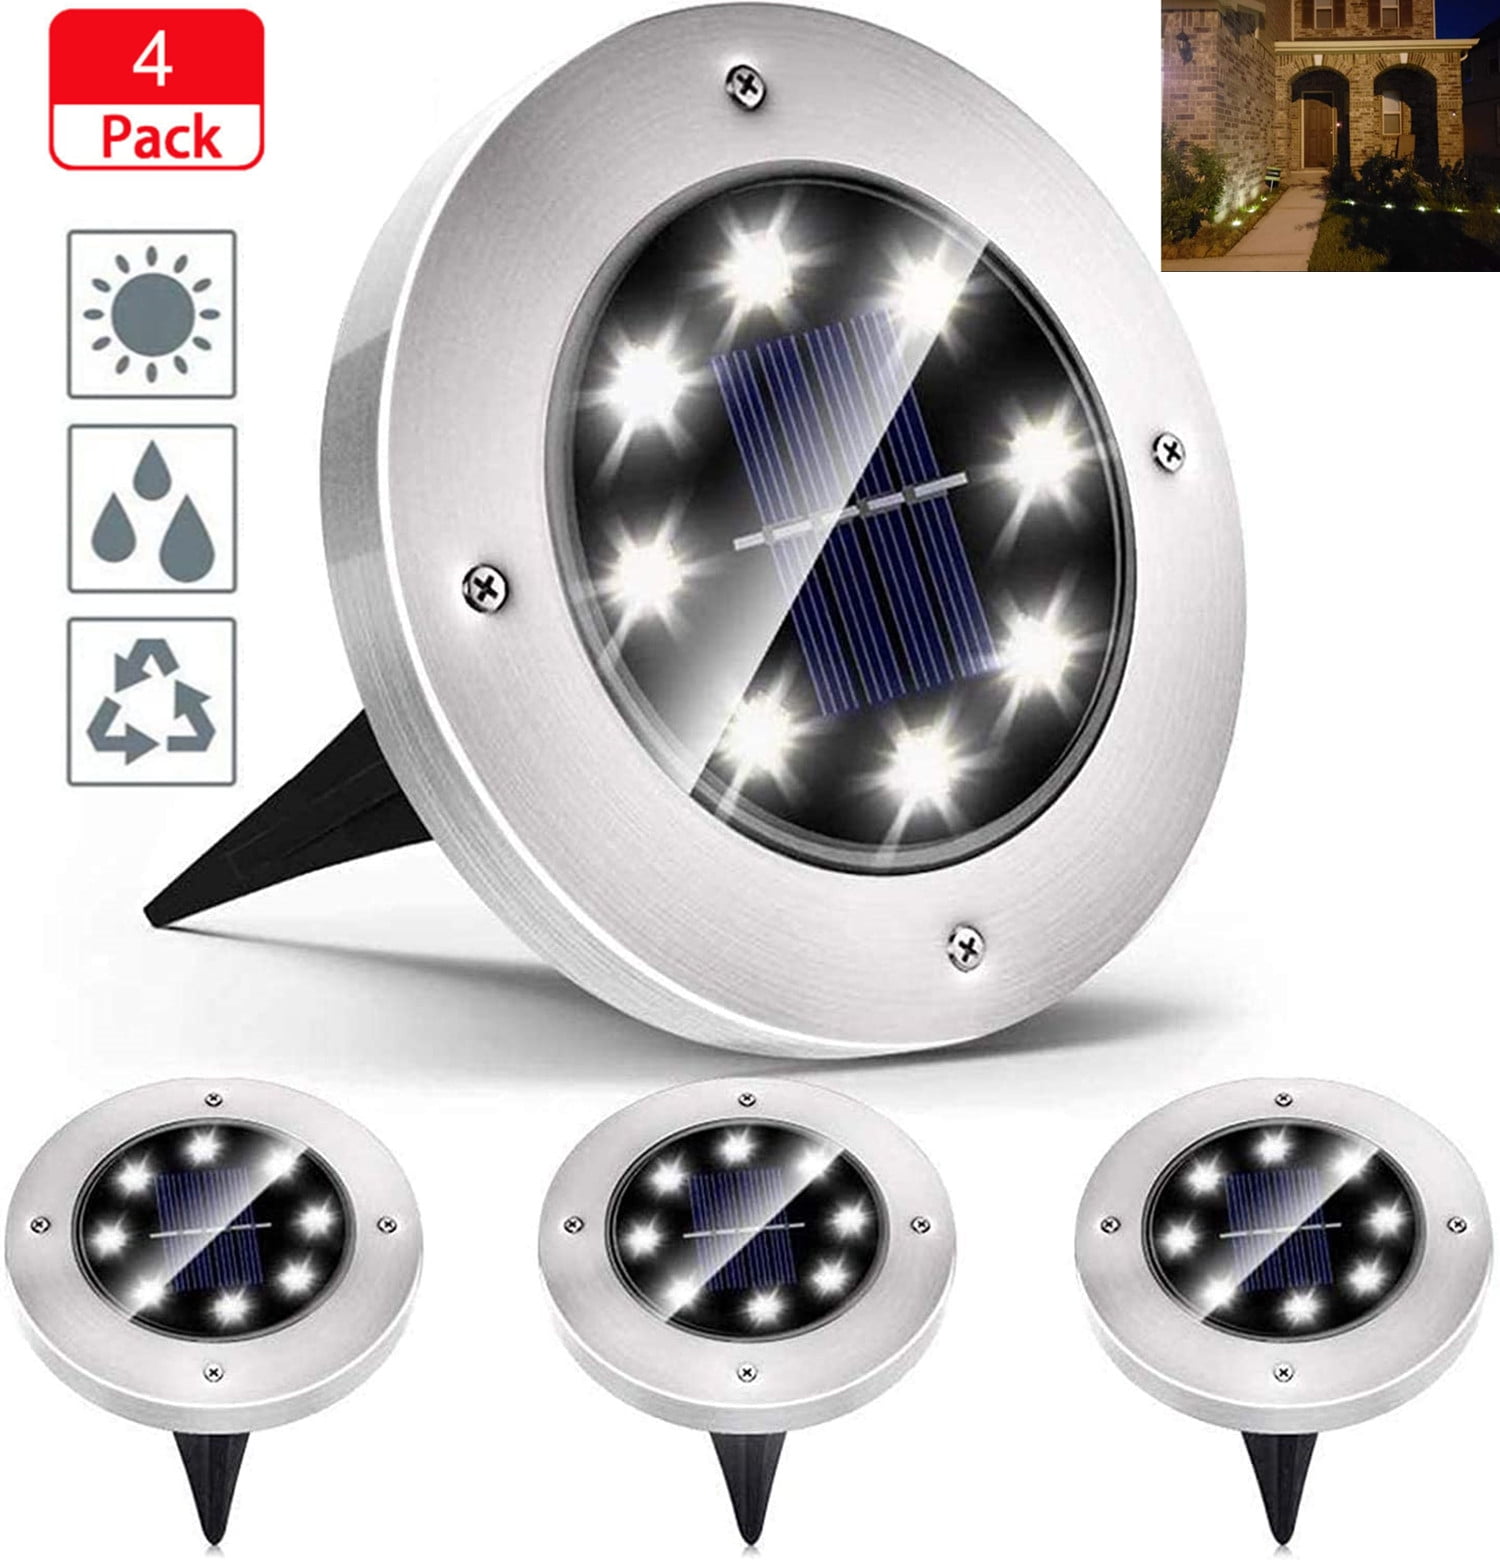 Details about   4 Pack 8 LED Solar Lights Ground Buried Garden Lawn Deck Outdoor Waterproof Lamp 